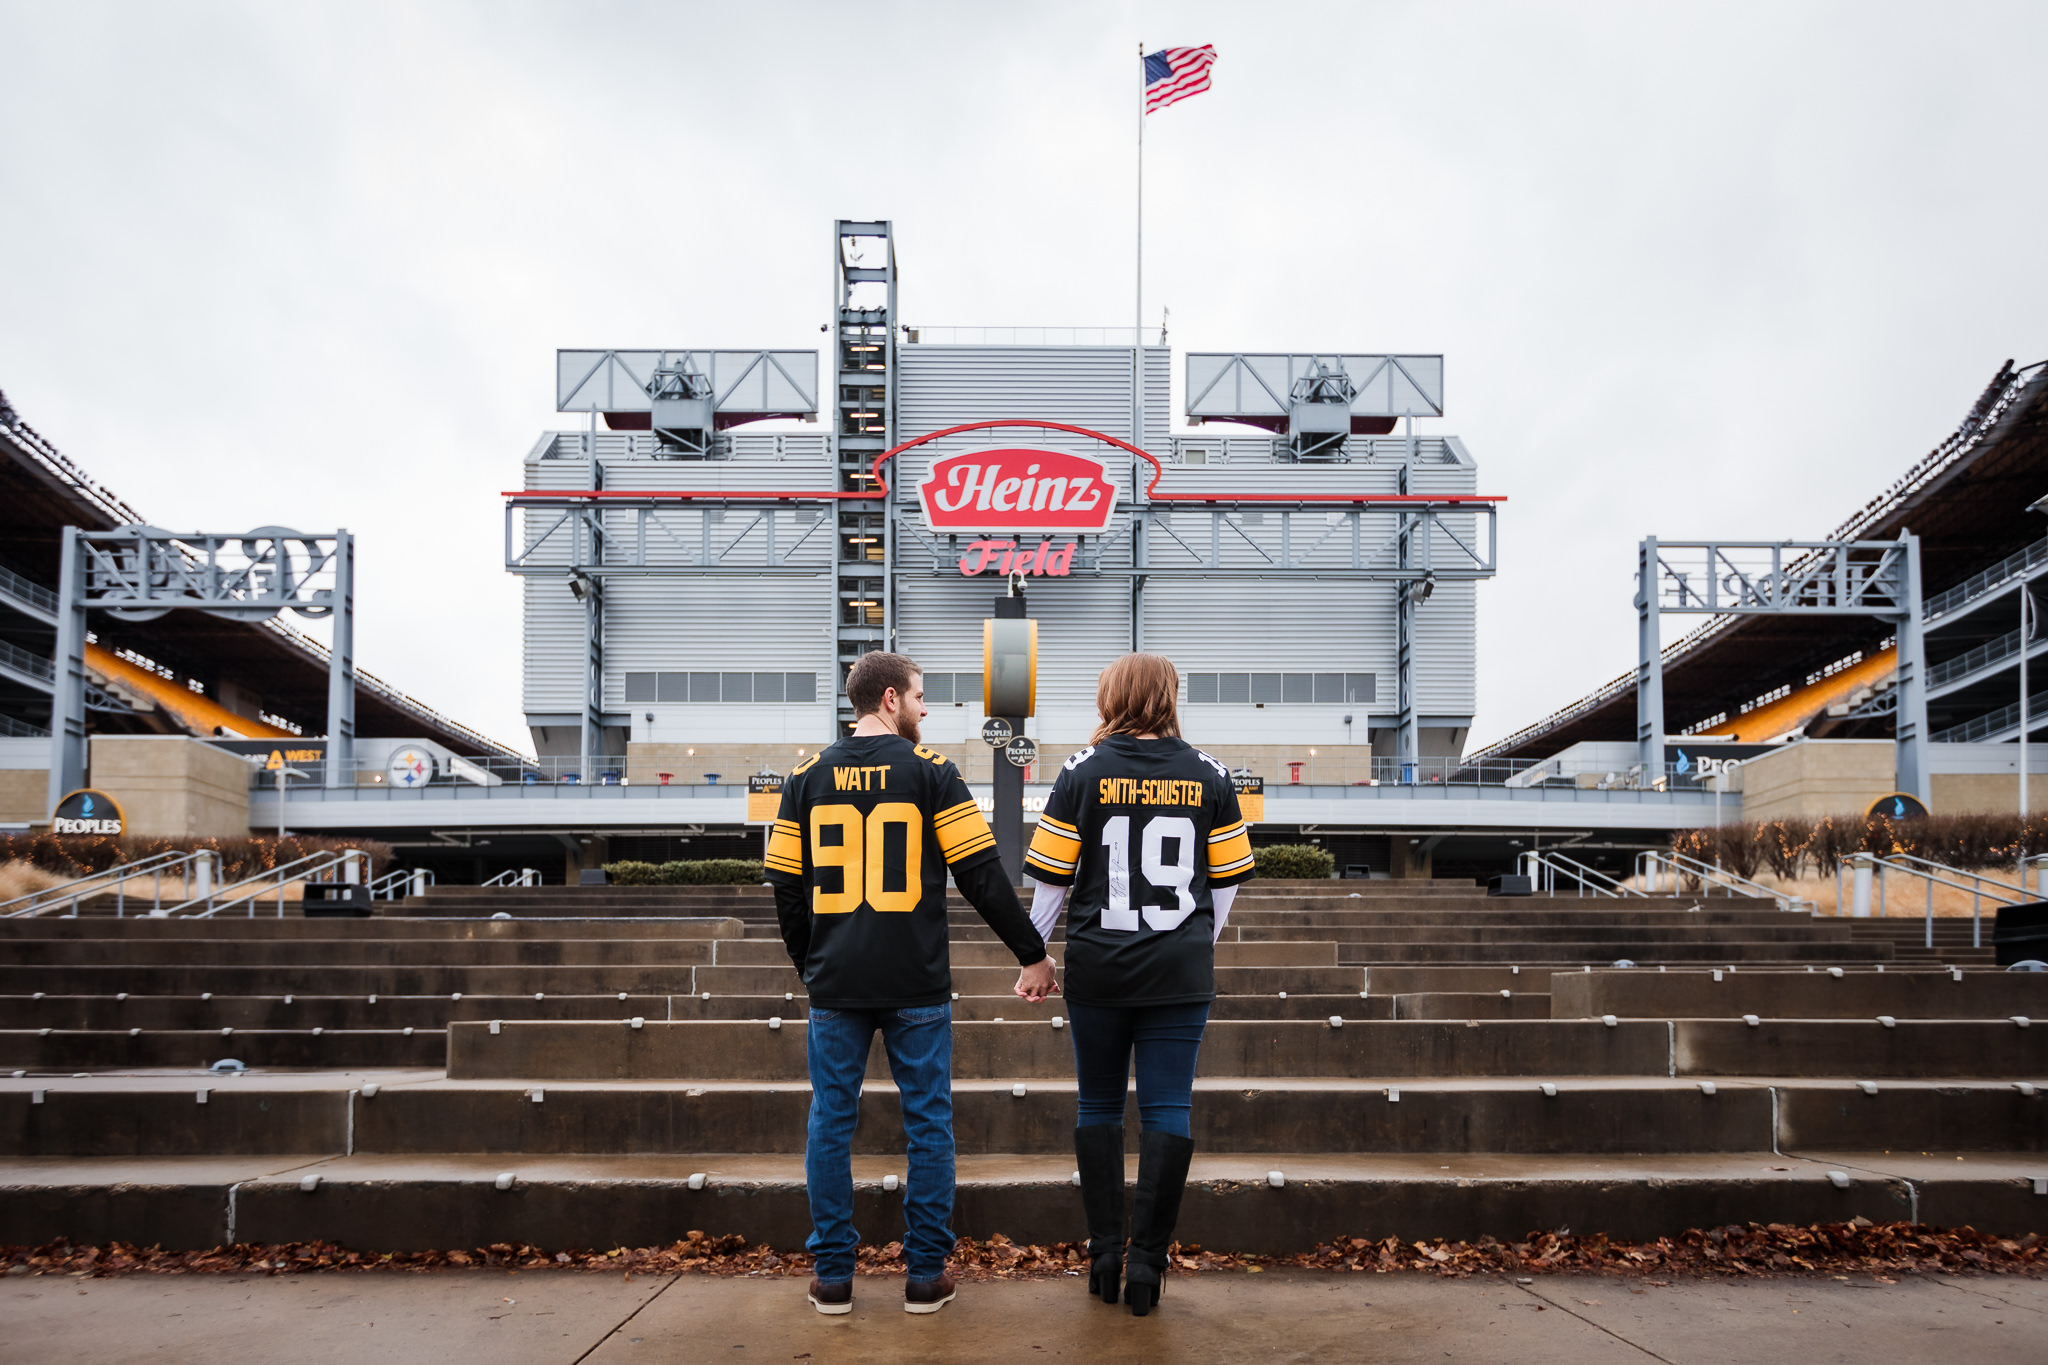 Engaged couple wearing Watt and Smith-Schuster Steelers jerseys in front of Heinz Field in Pittsburgh, PA